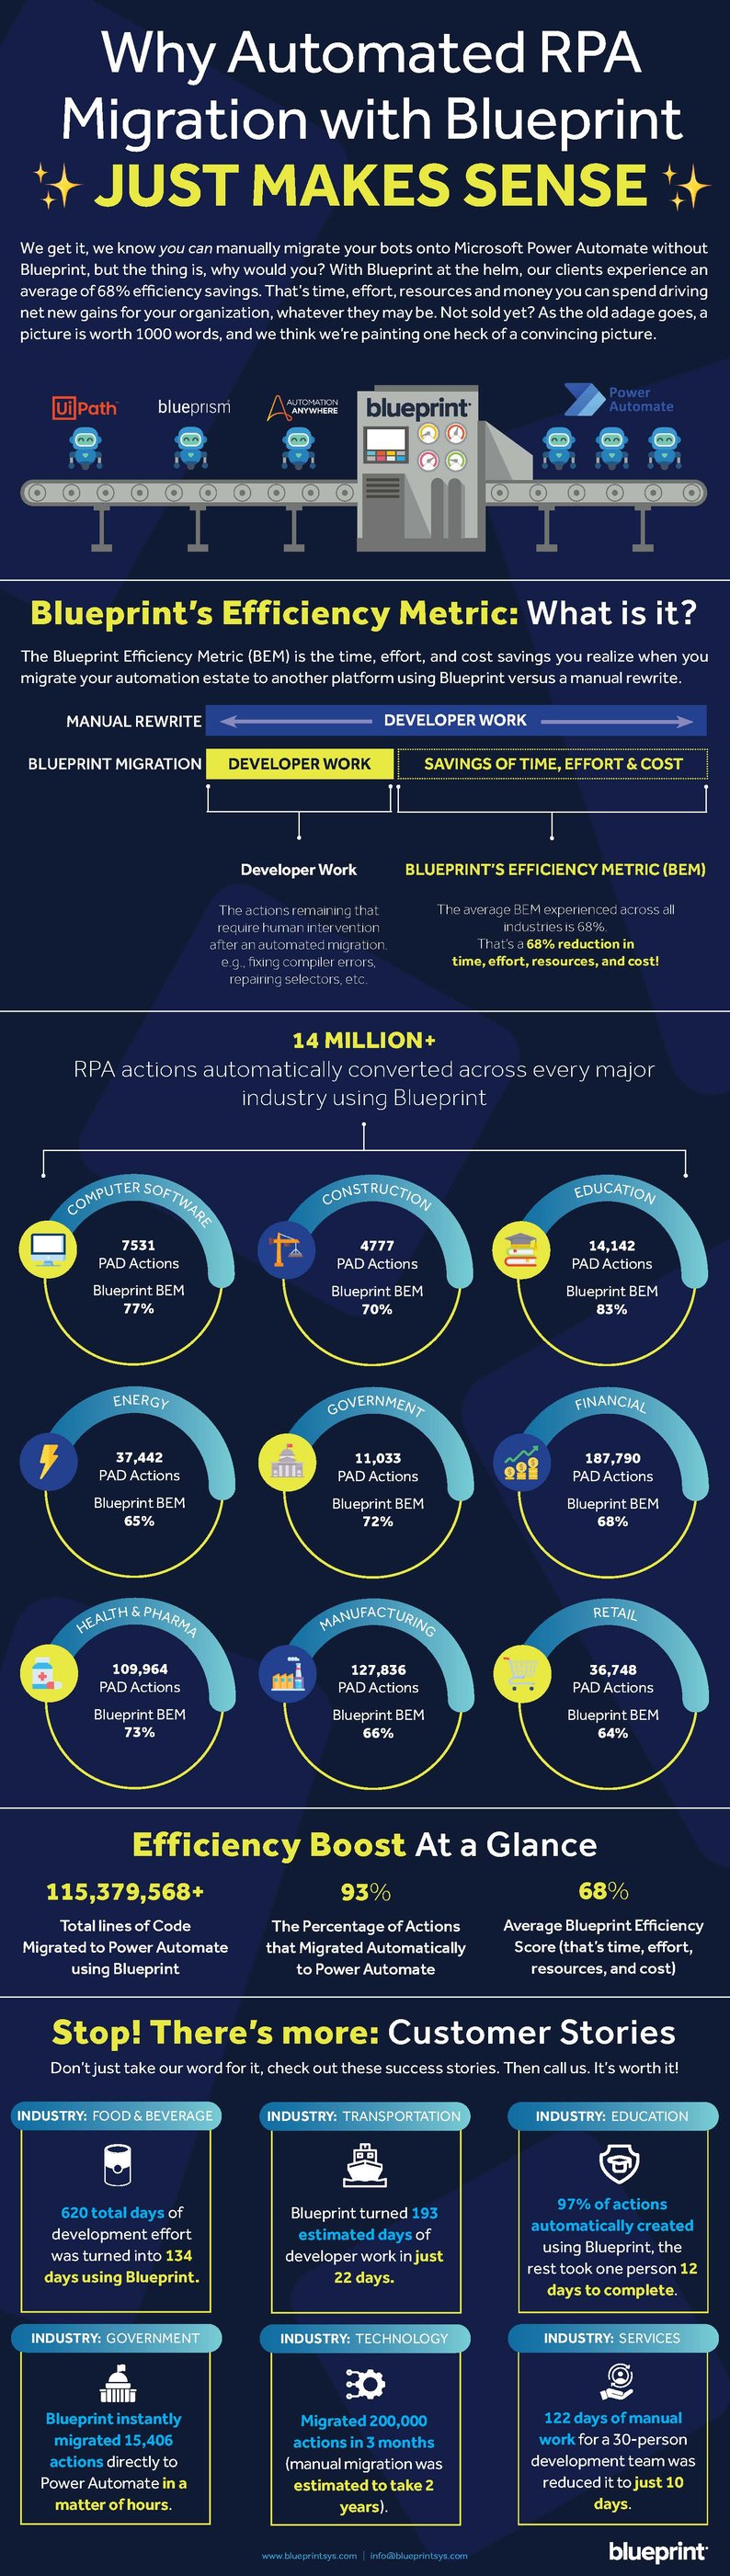 Automated RPA Migration Infographic - May 10